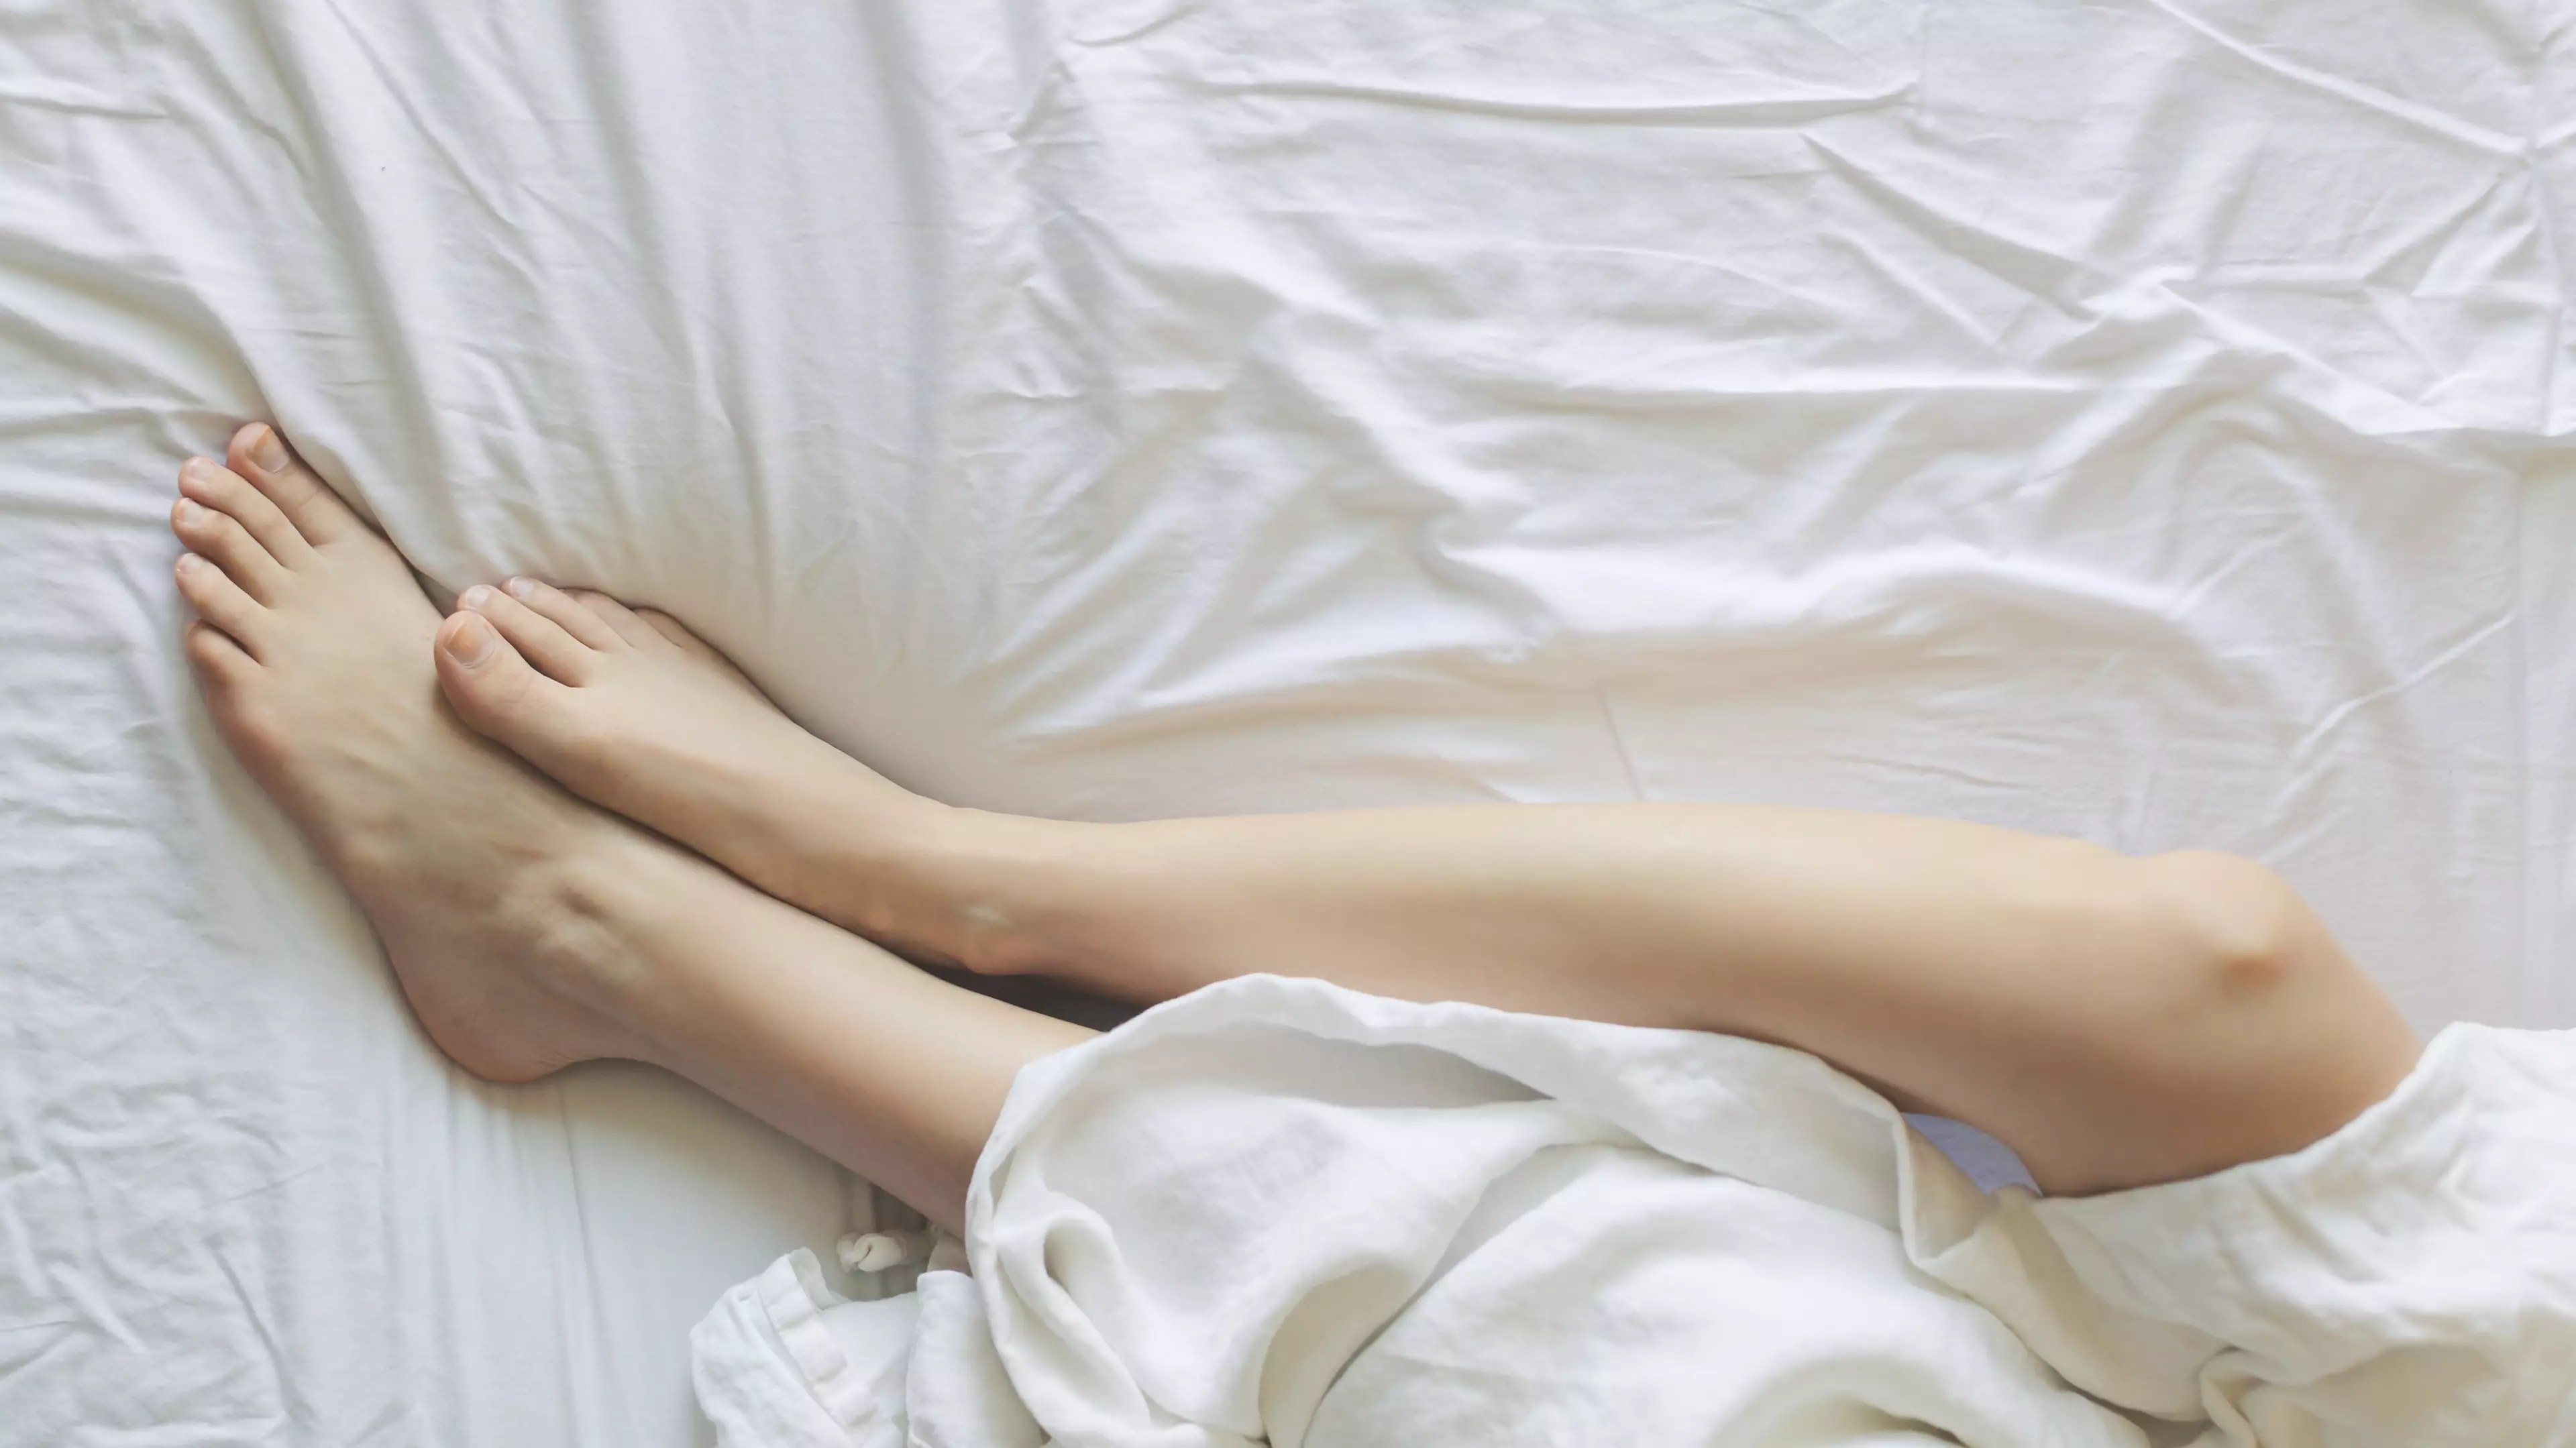 ​Masturbating Before Bed Can Lead To Better Night’s Sleep, Expert Says